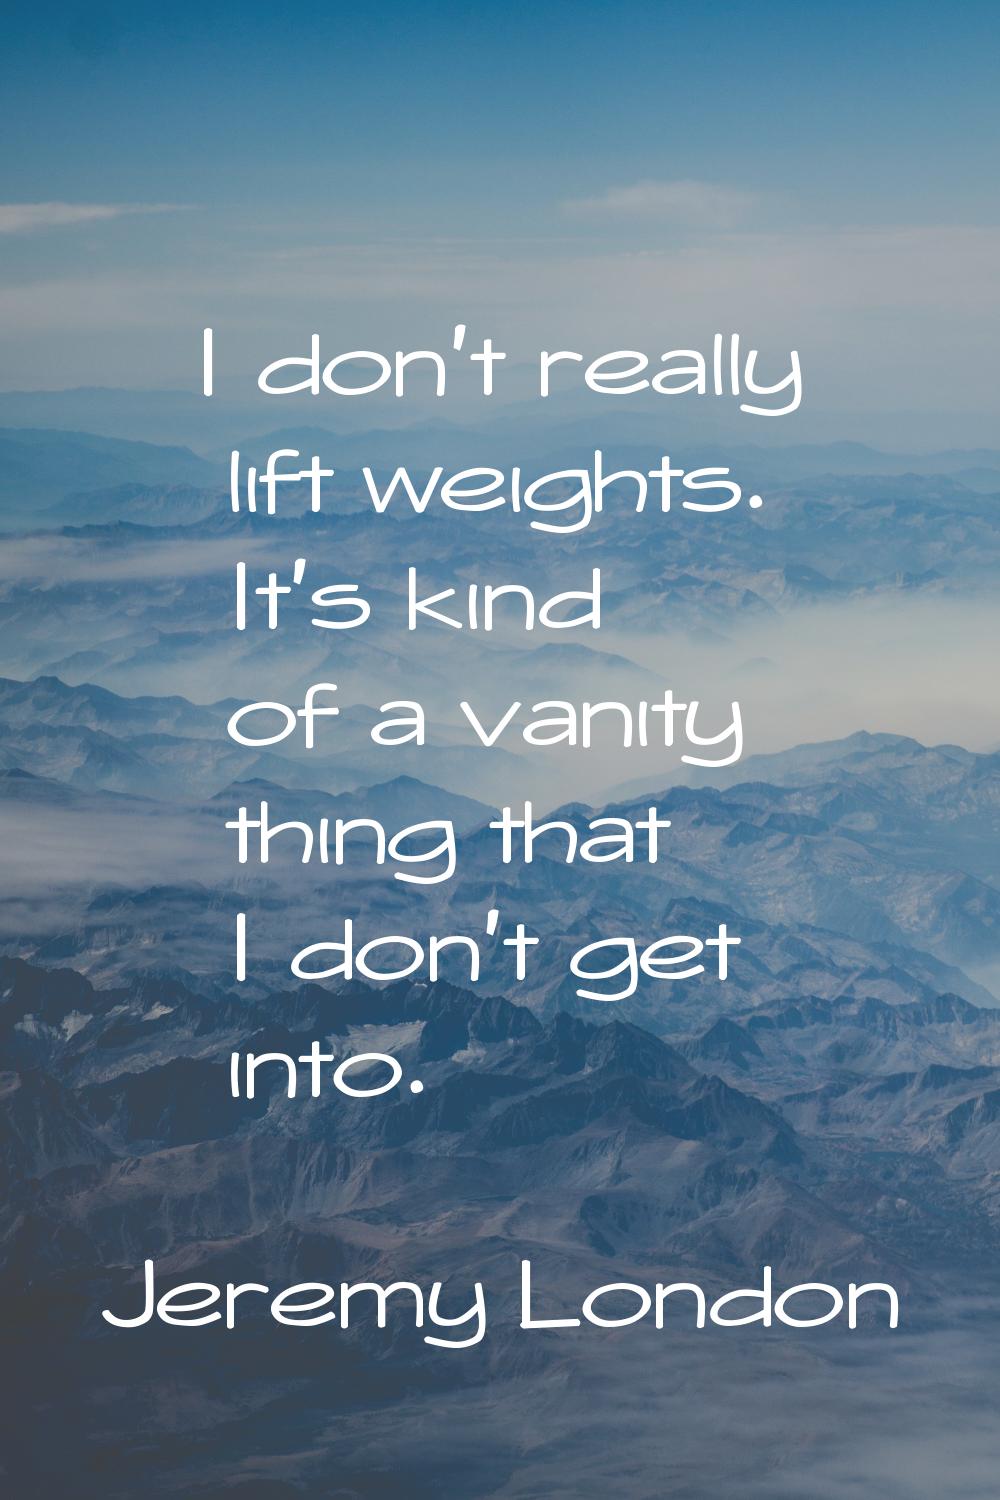 I don't really lift weights. It's kind of a vanity thing that I don't get into.